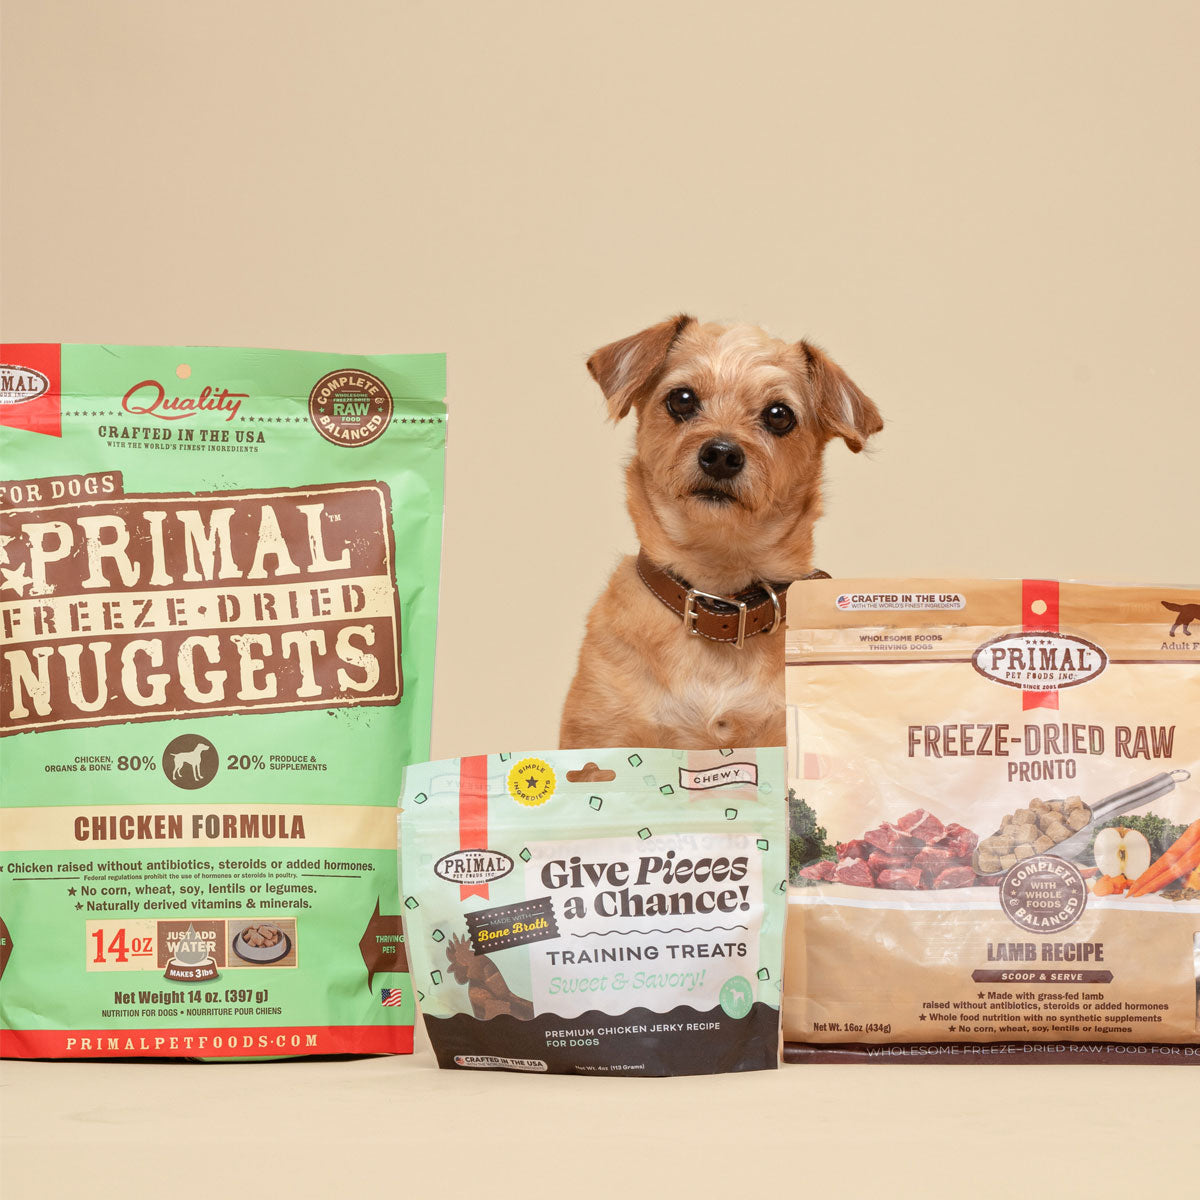 Natural, Healthy Pet Food for Dogs & Cats